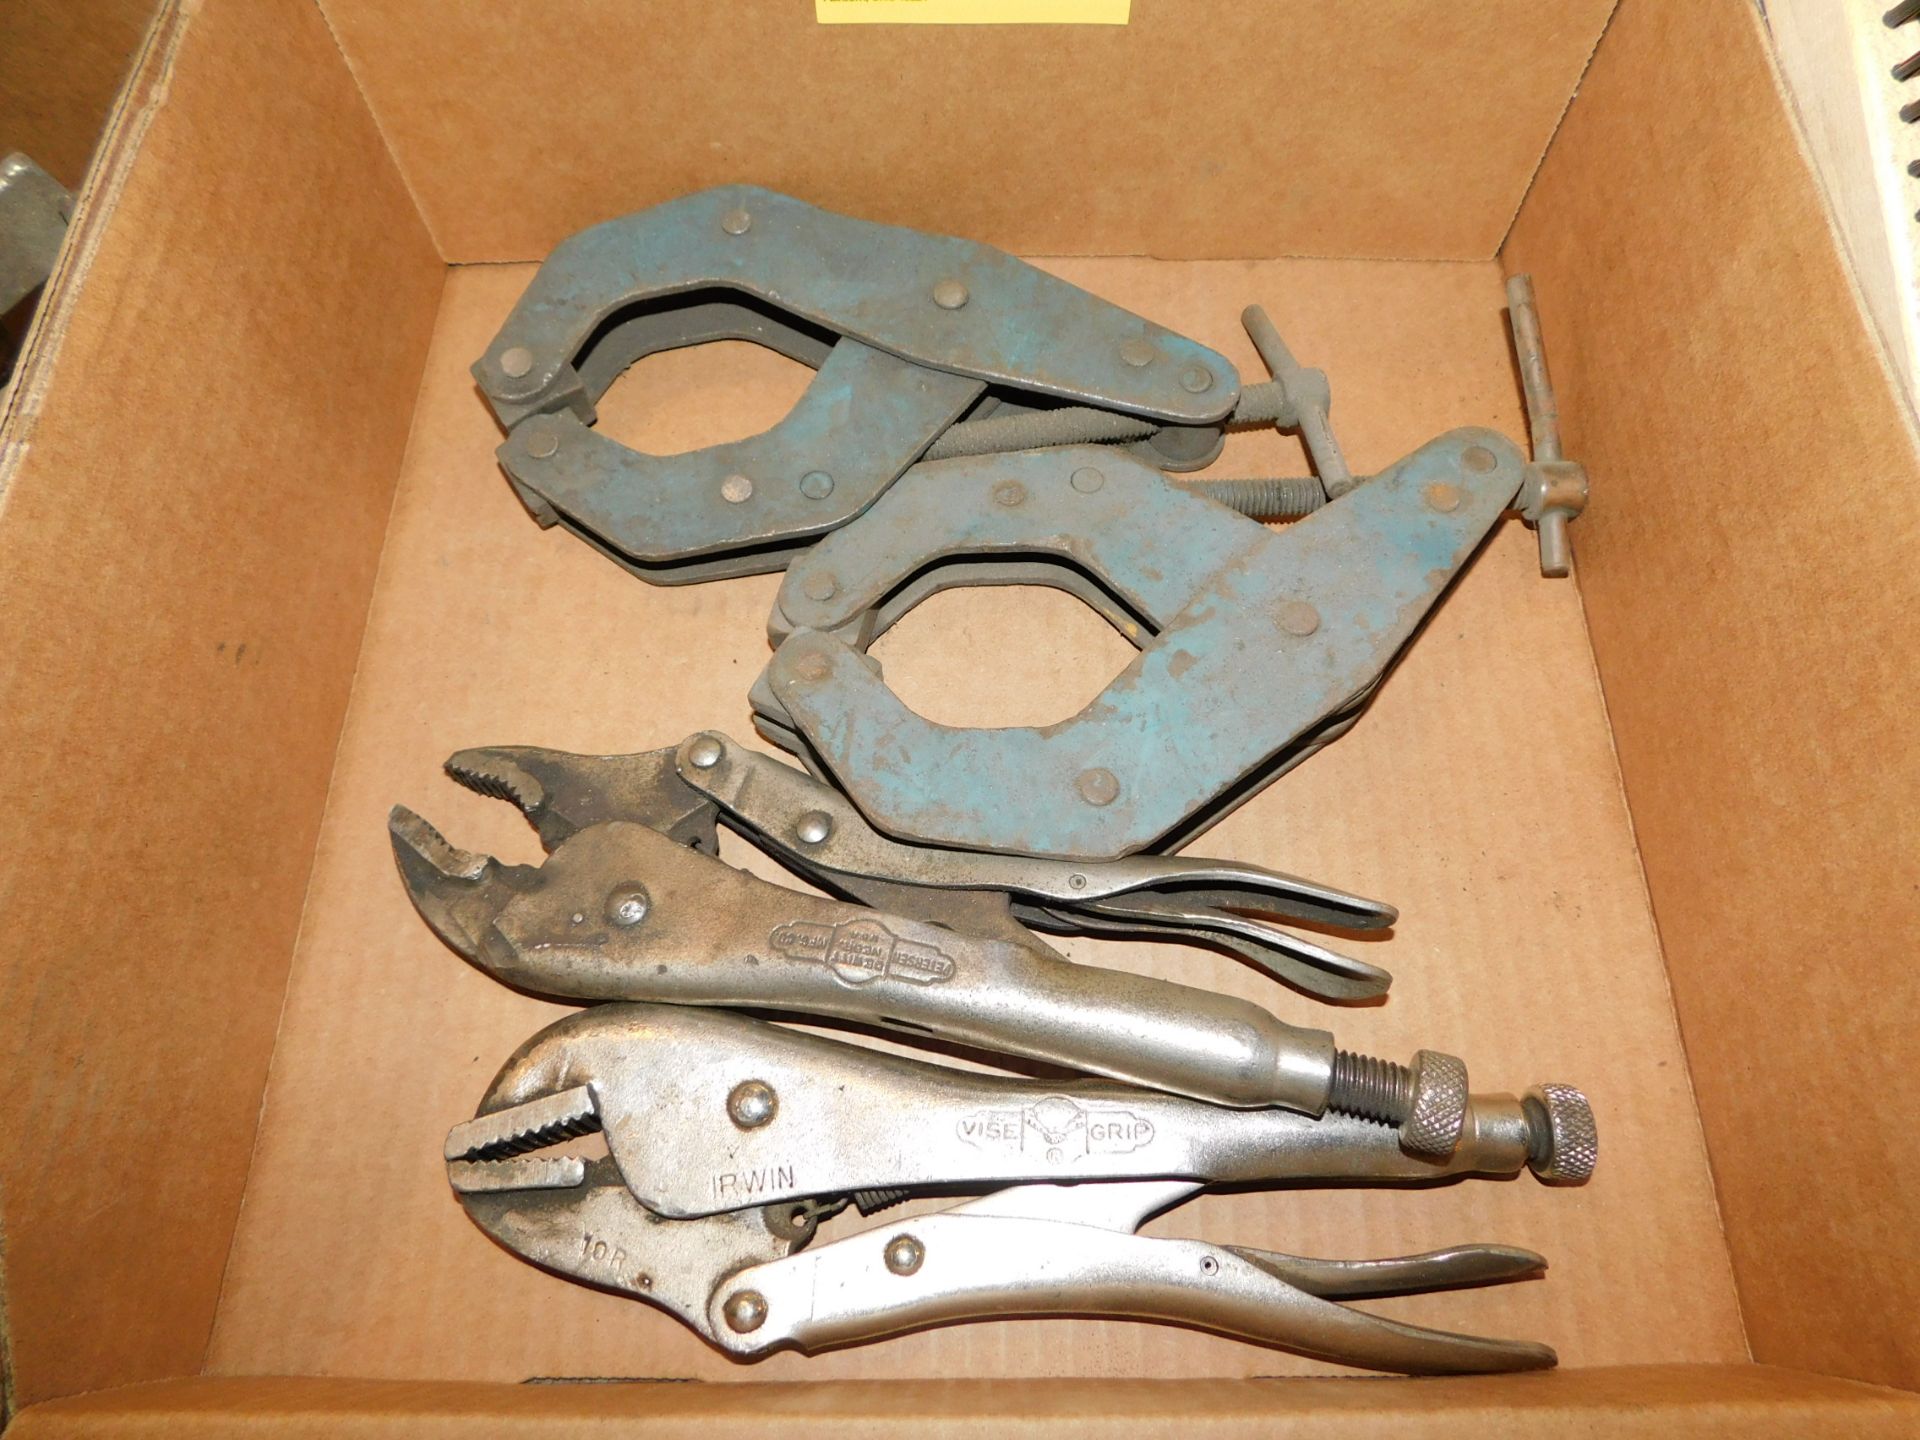 Vise Grip Welding Clamps and Kant Twist Clamps